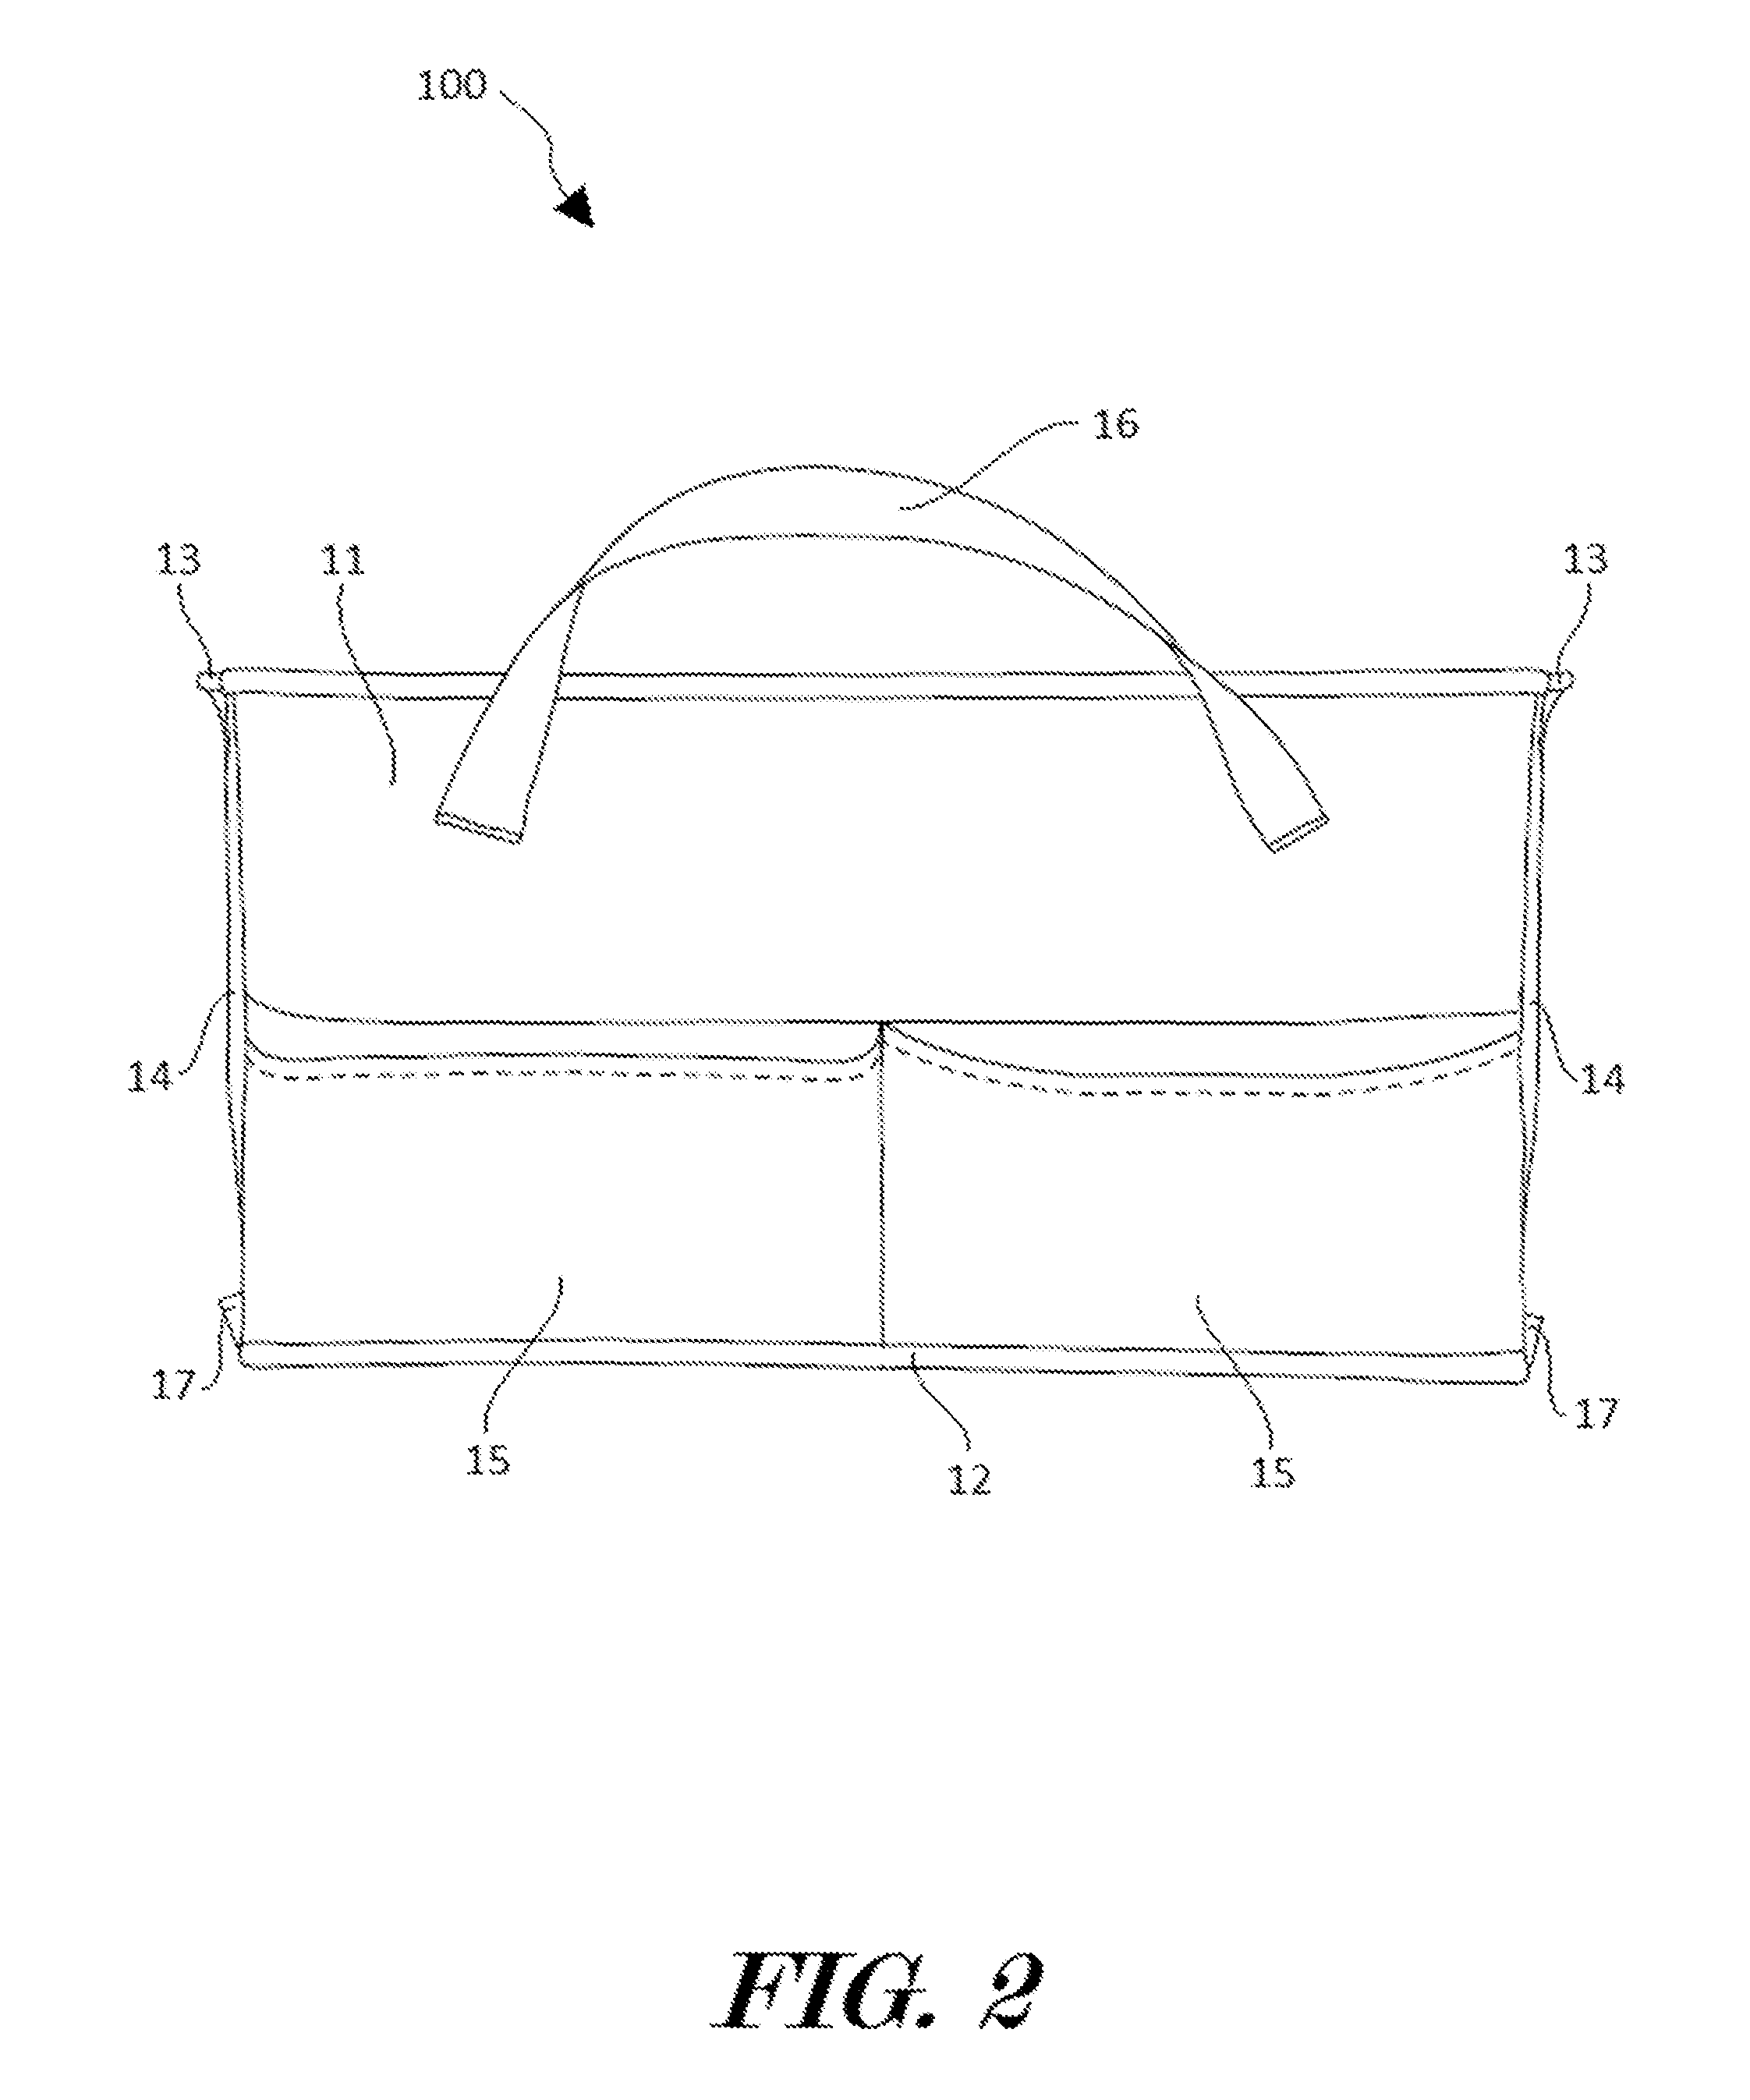 Food and beverage container transport device